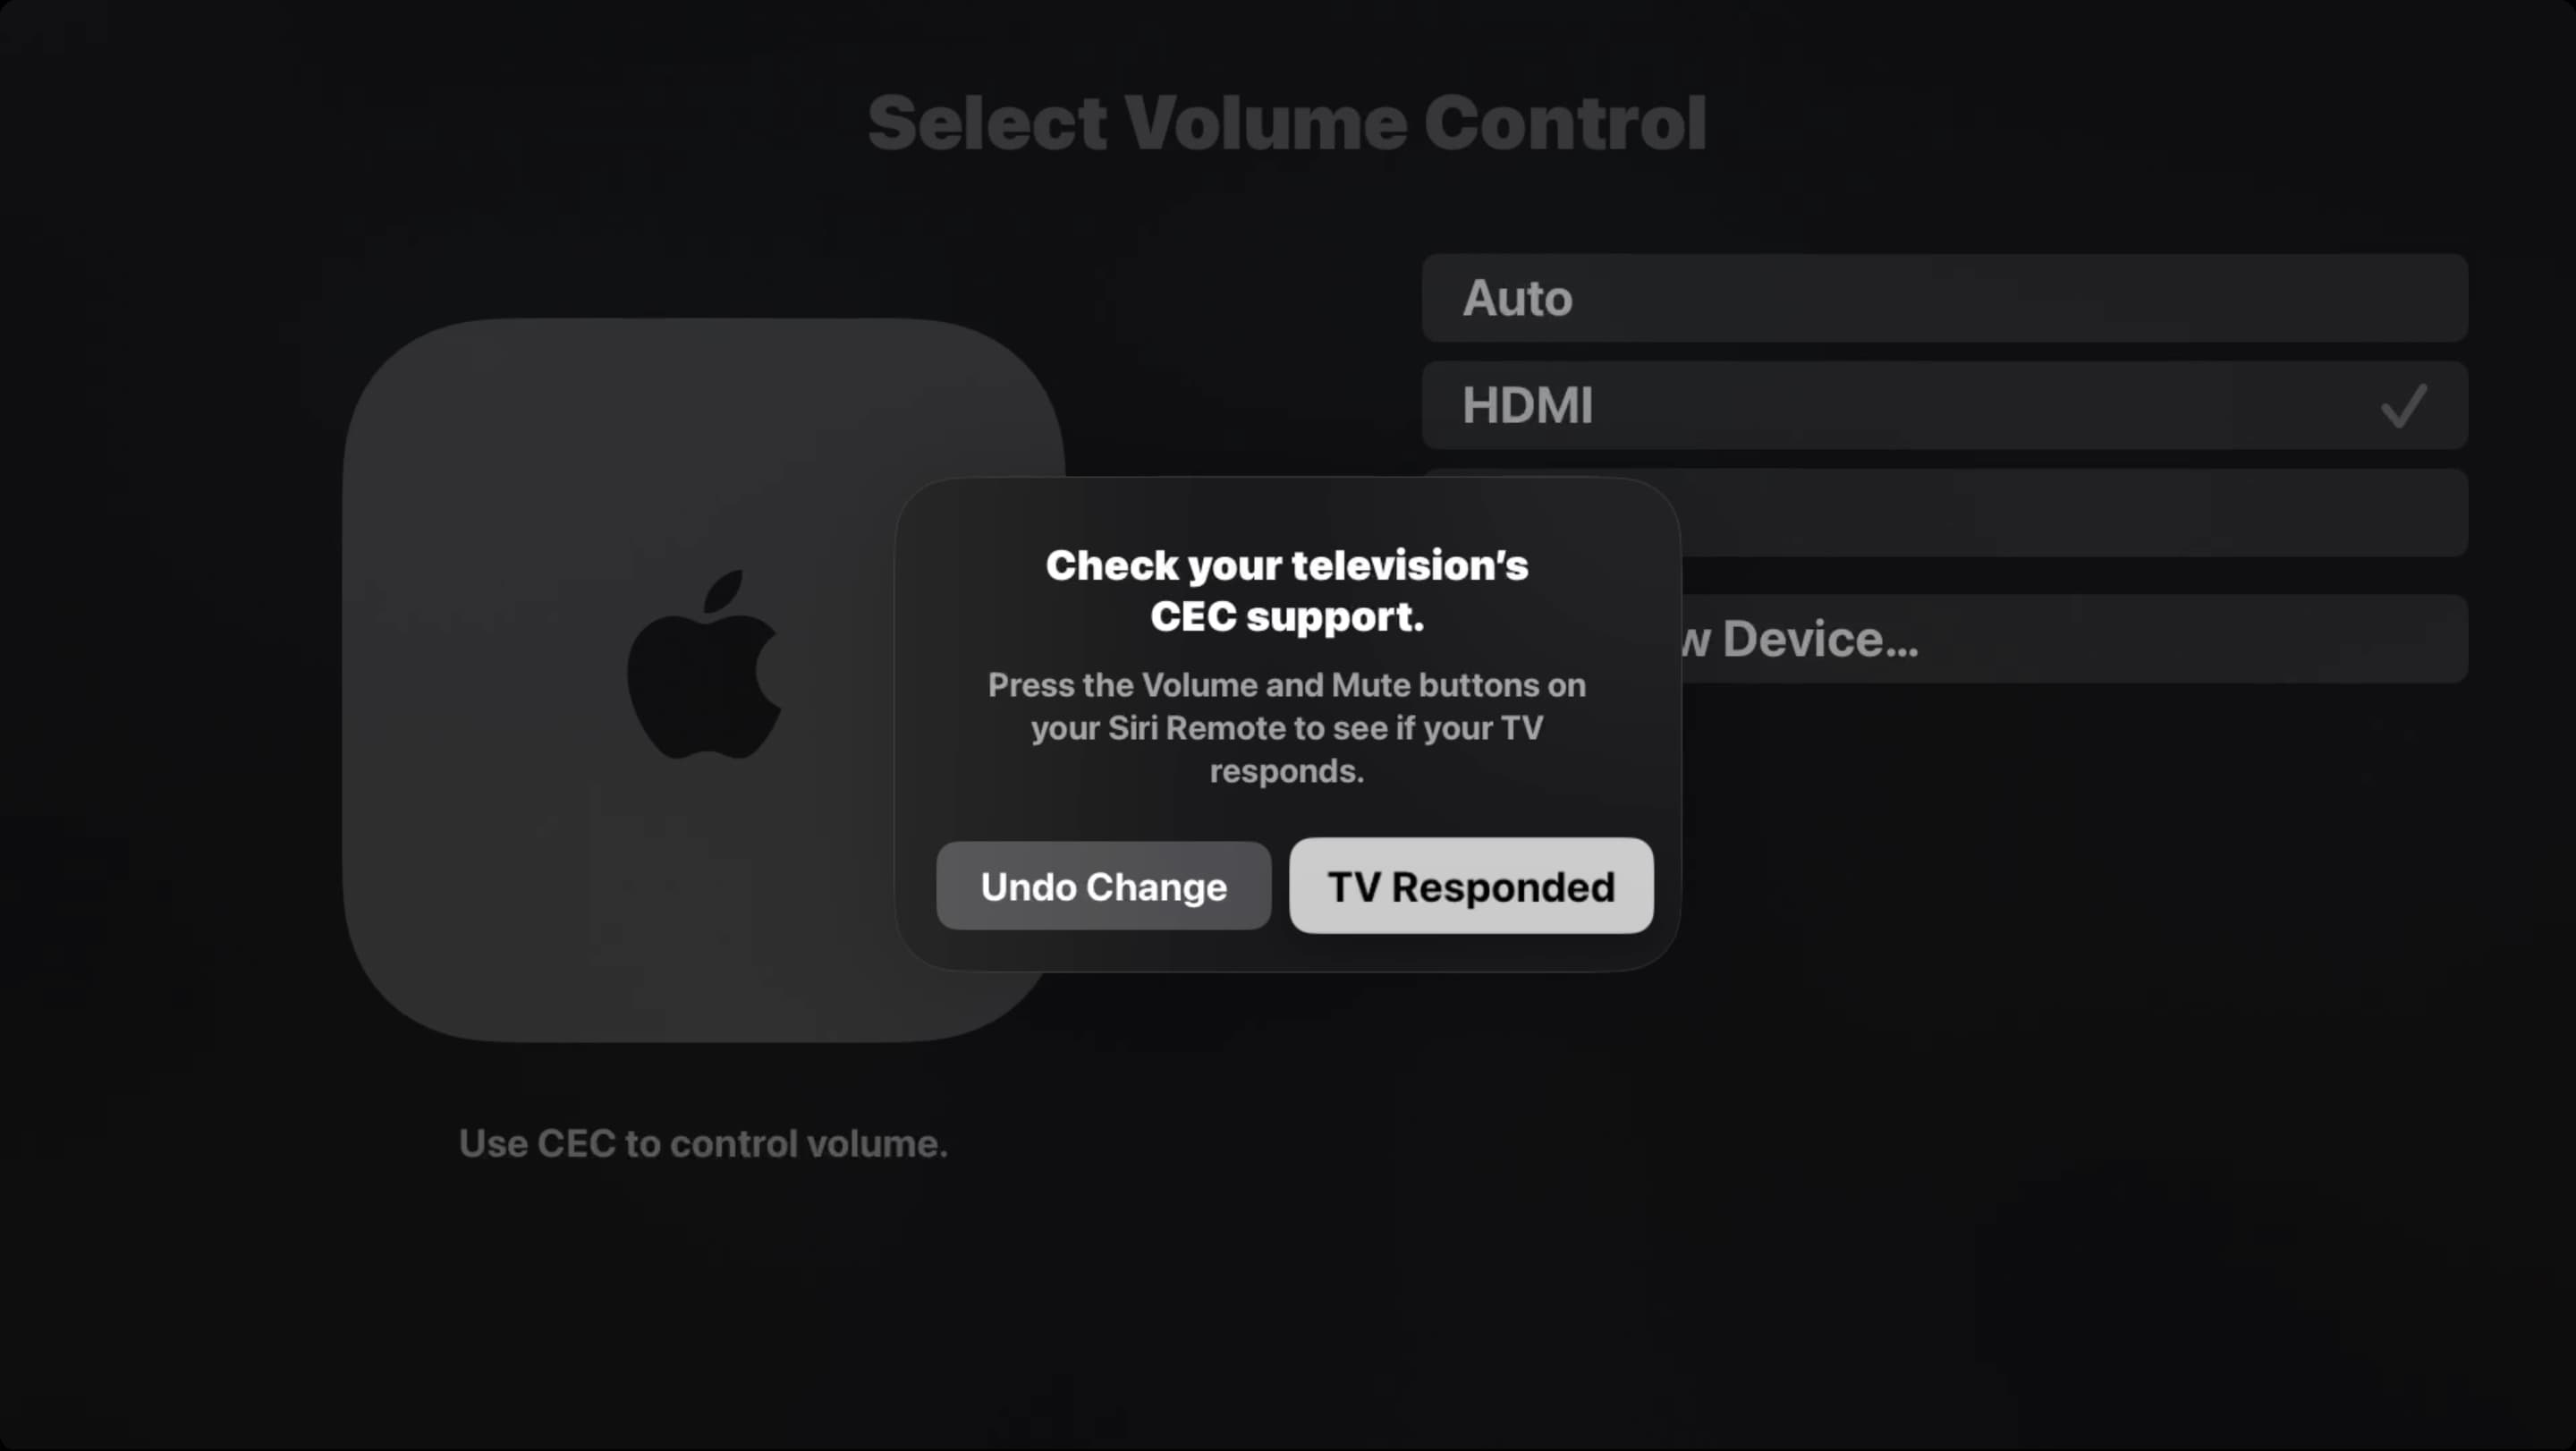 Check your television CEC support on Apple TV